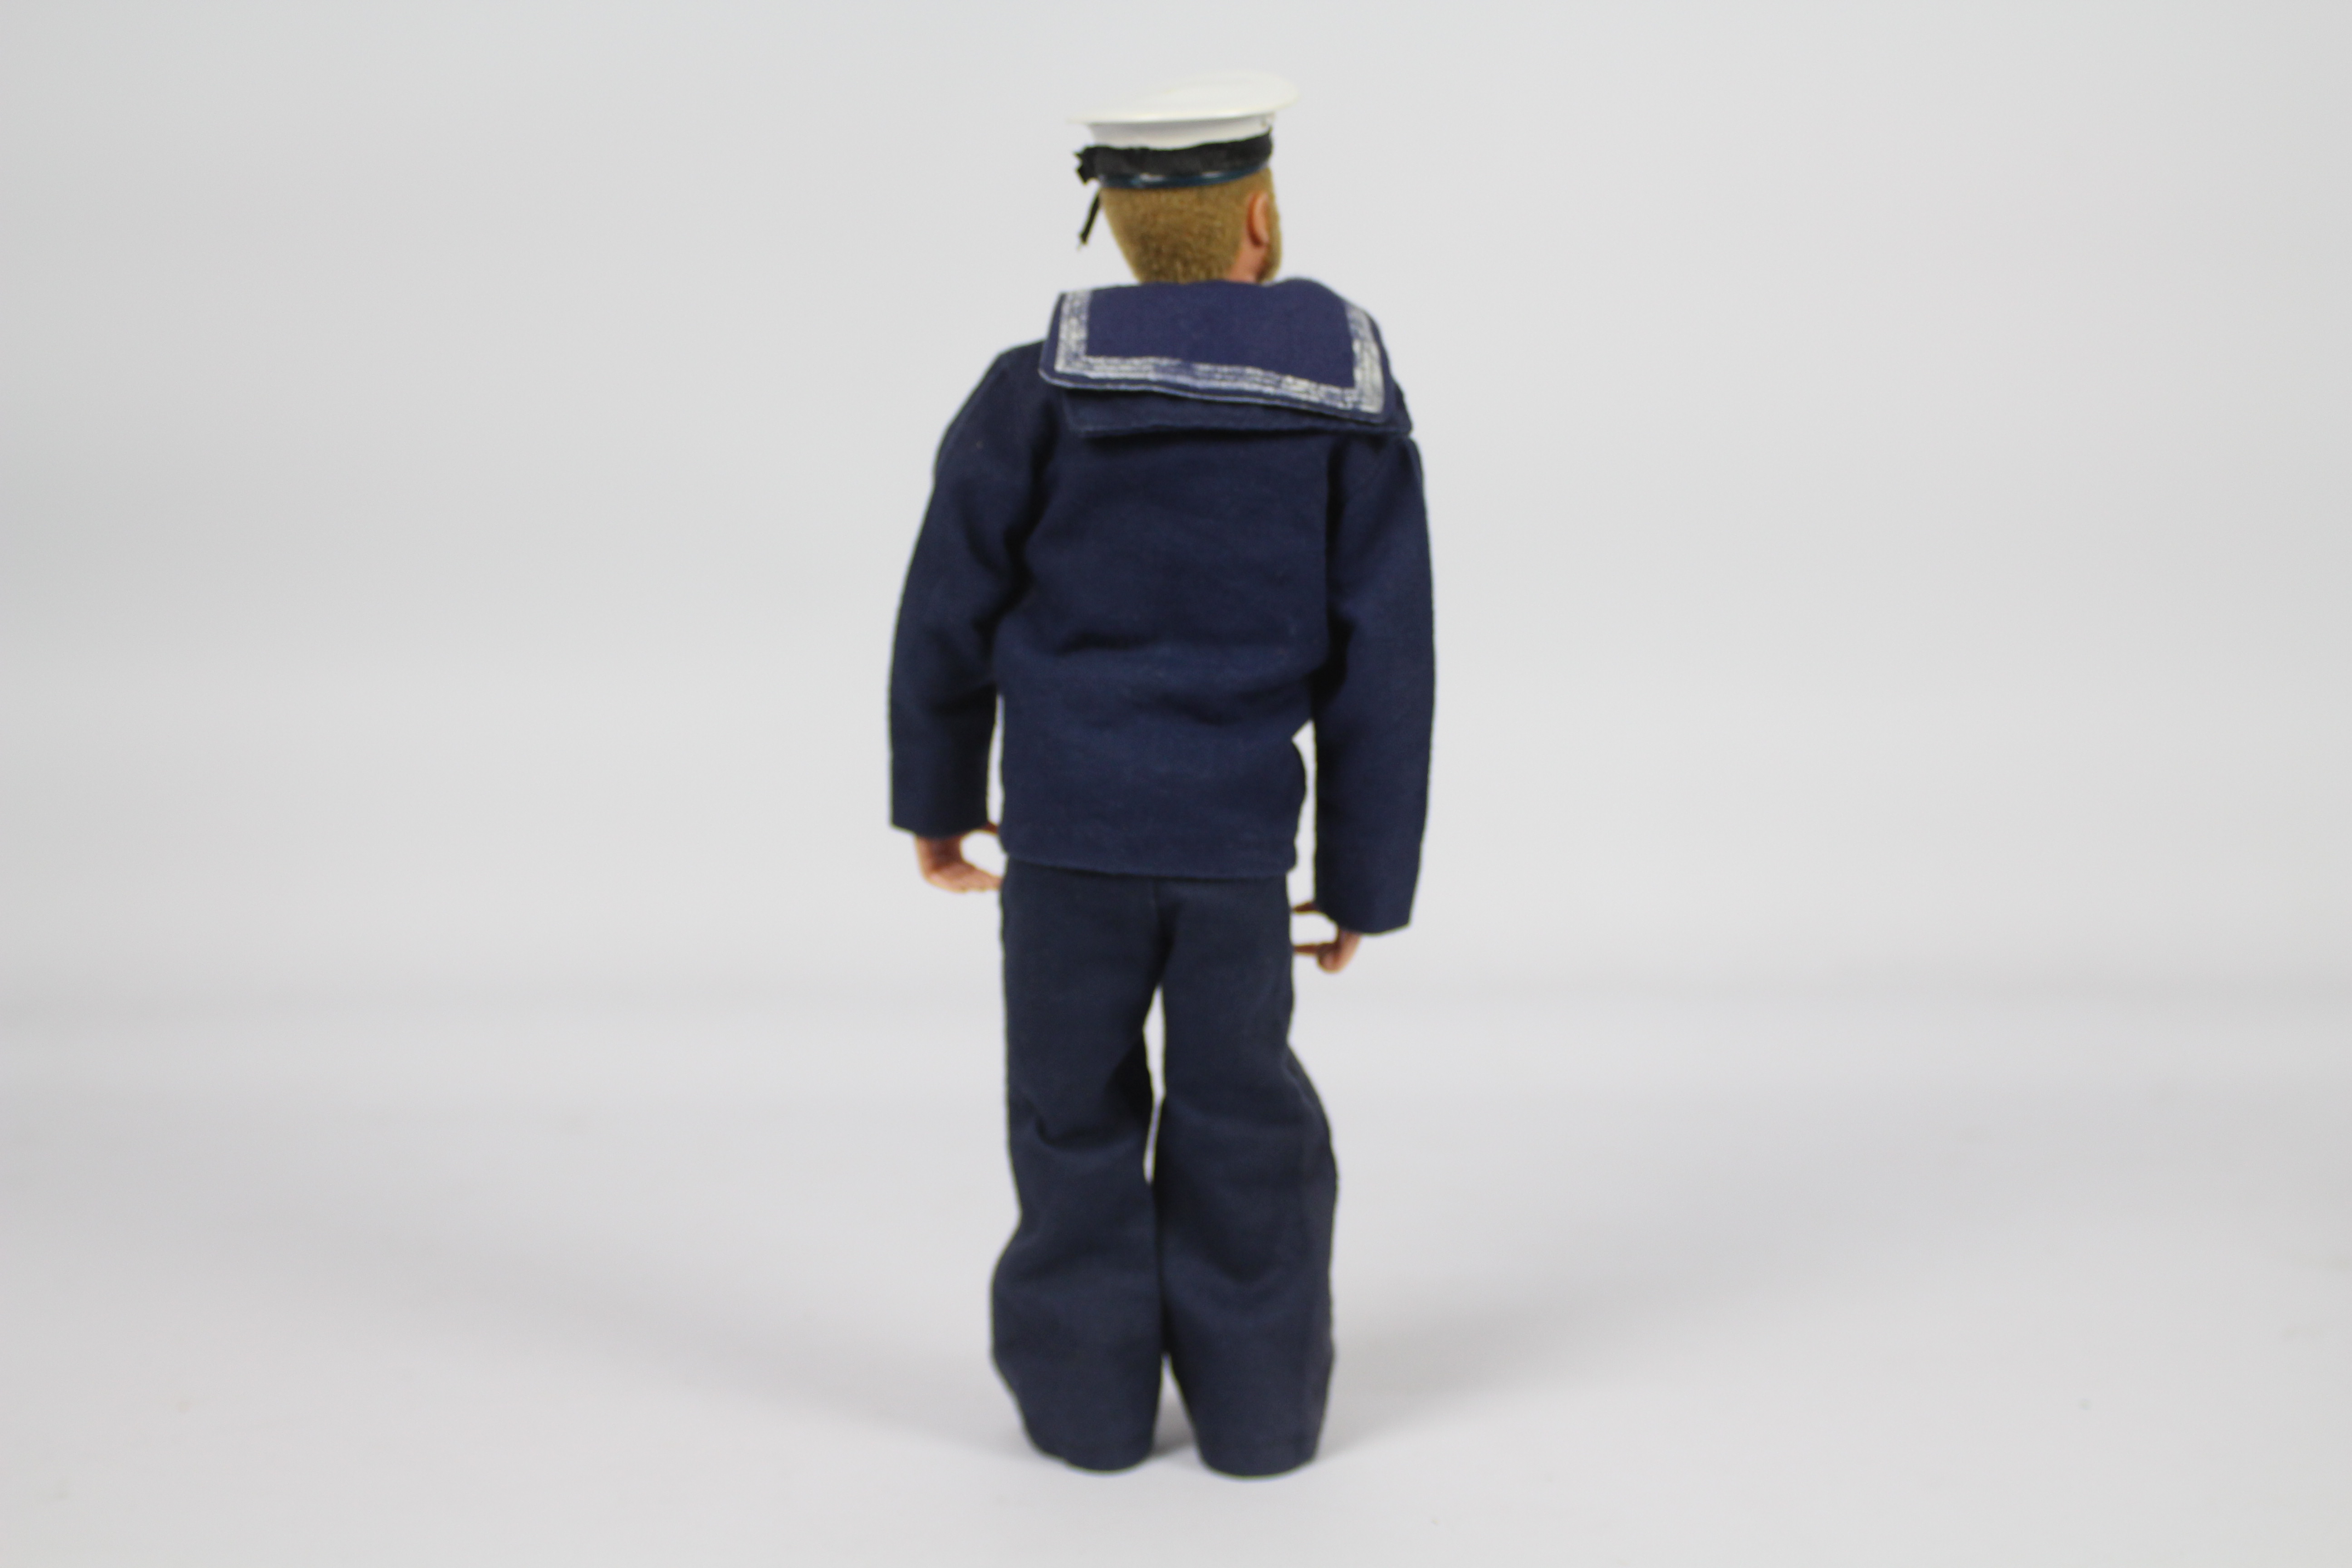 Palitoy, Action Man - A Palitoy Action Man figure in Sailor outfit. - Image 8 of 9